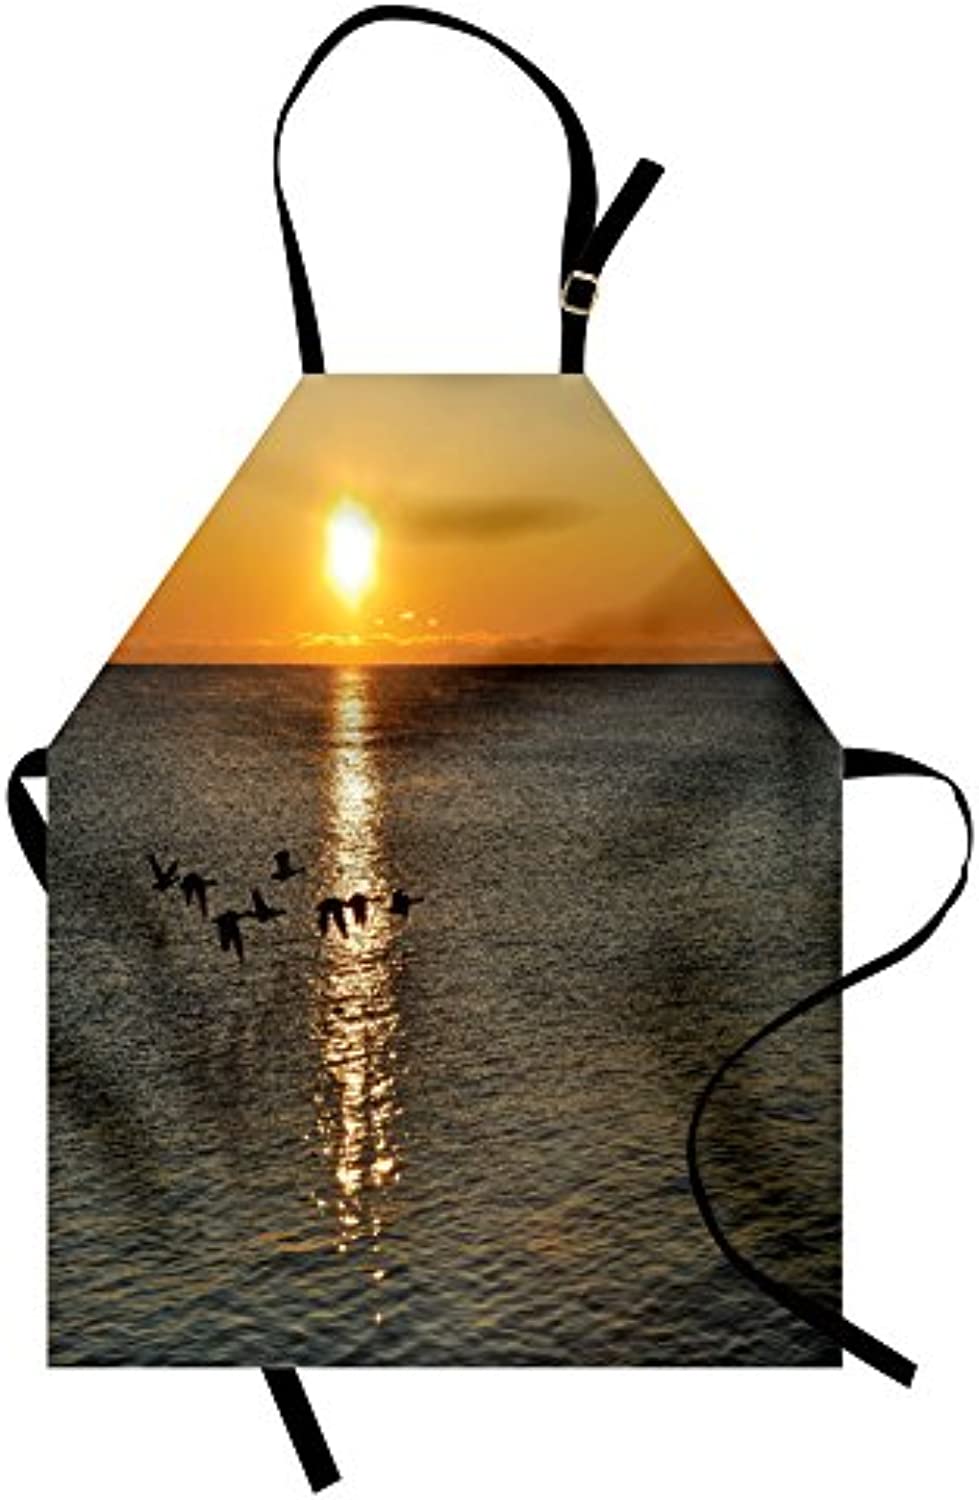 Granbey Birds Apron  Silhouettes of Canadian Geese Flying over a Lake at Sunrise Romantic Scenery  Unisex Kitchen Bib with Adjustable Neck for Cooking Gardening  Adult Size  Orange Grey